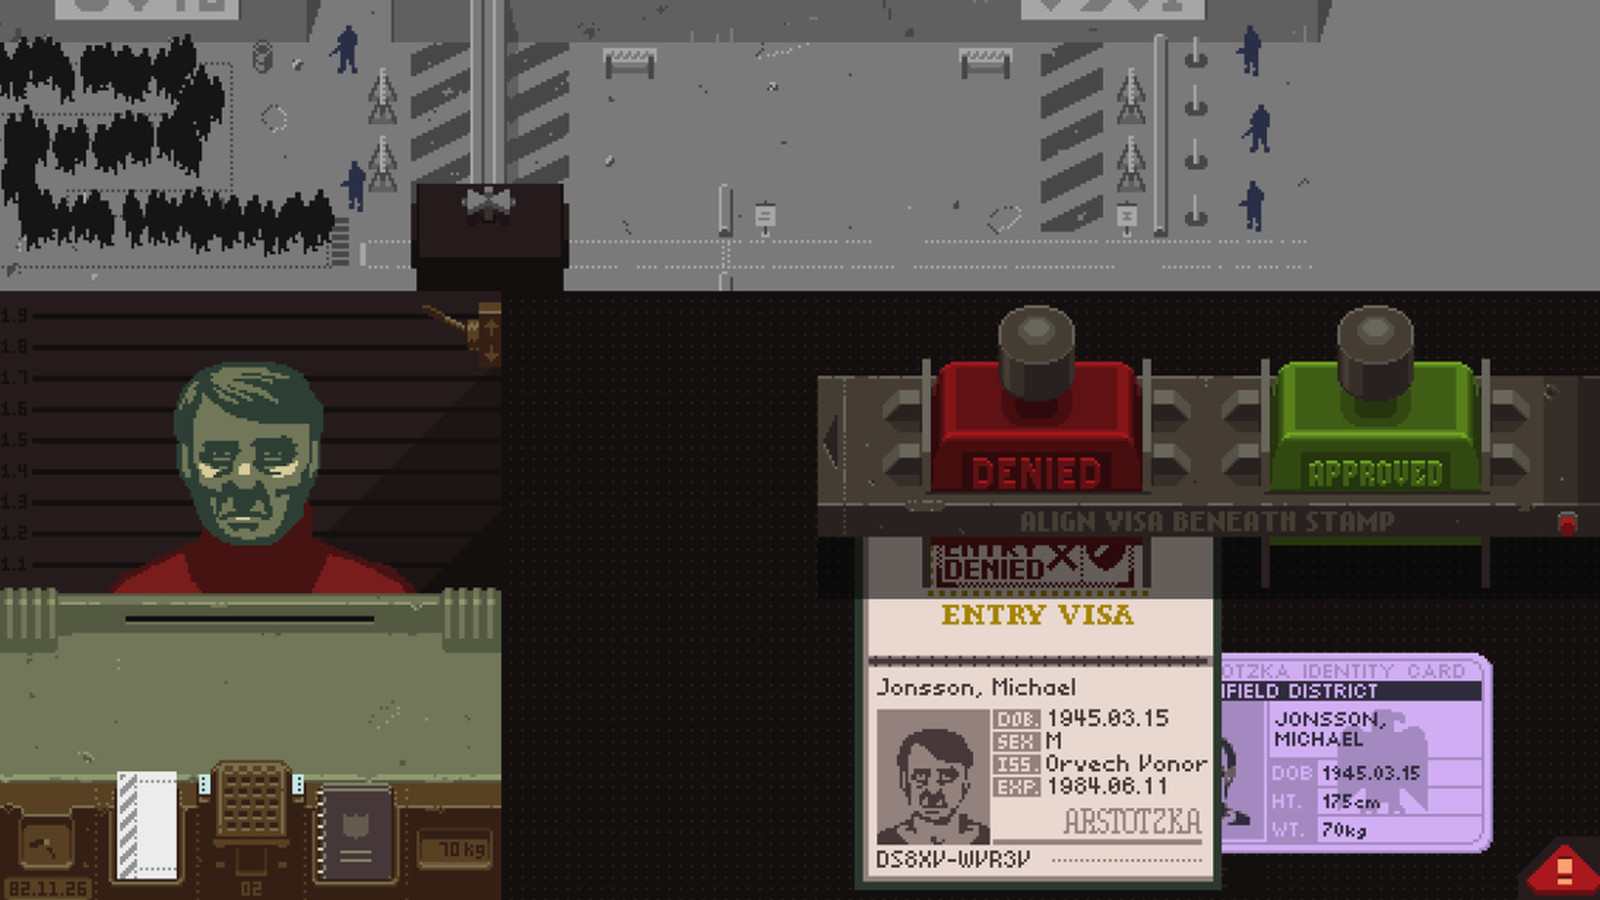 Systems and Activism in 'Papers, Please